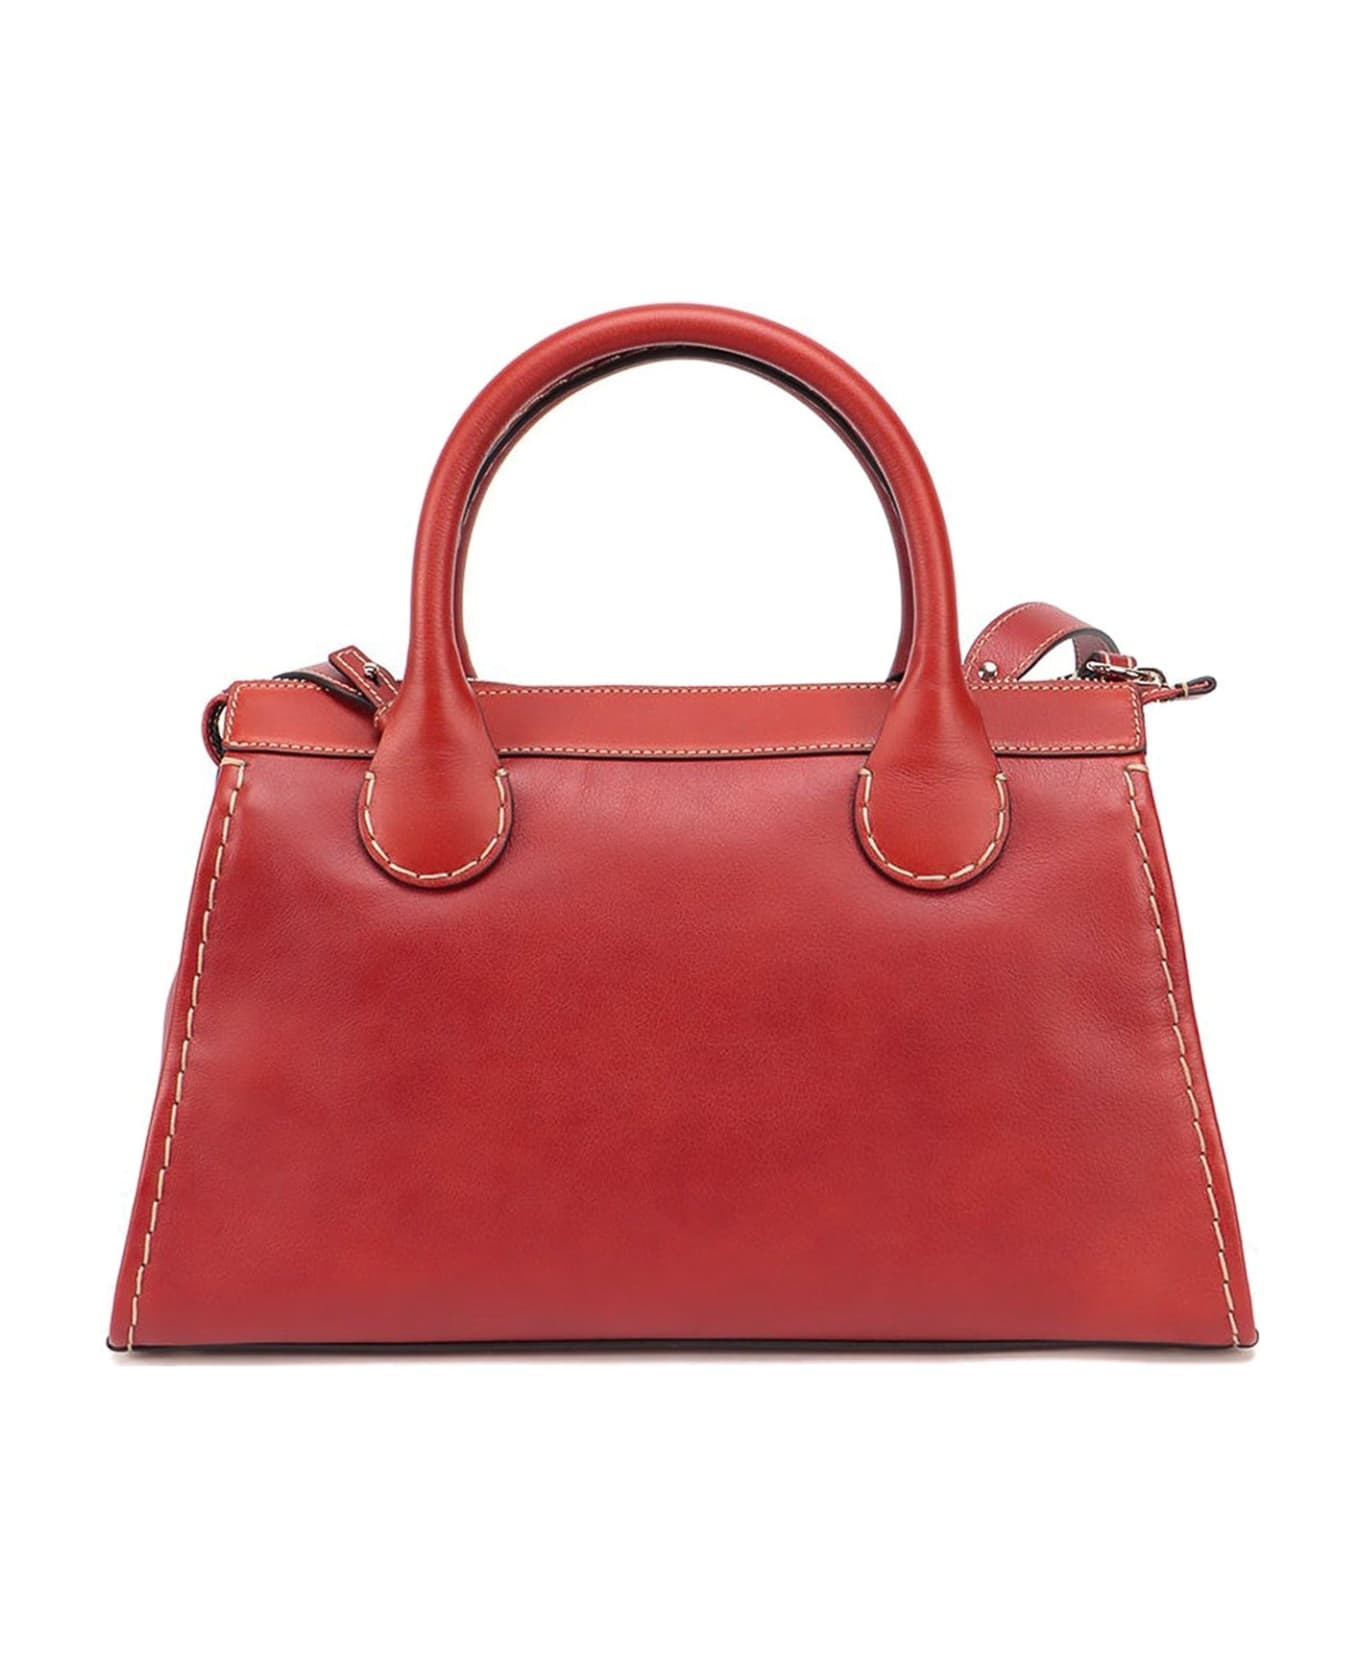 Chloé Edith Leather Tote Bag - Brown